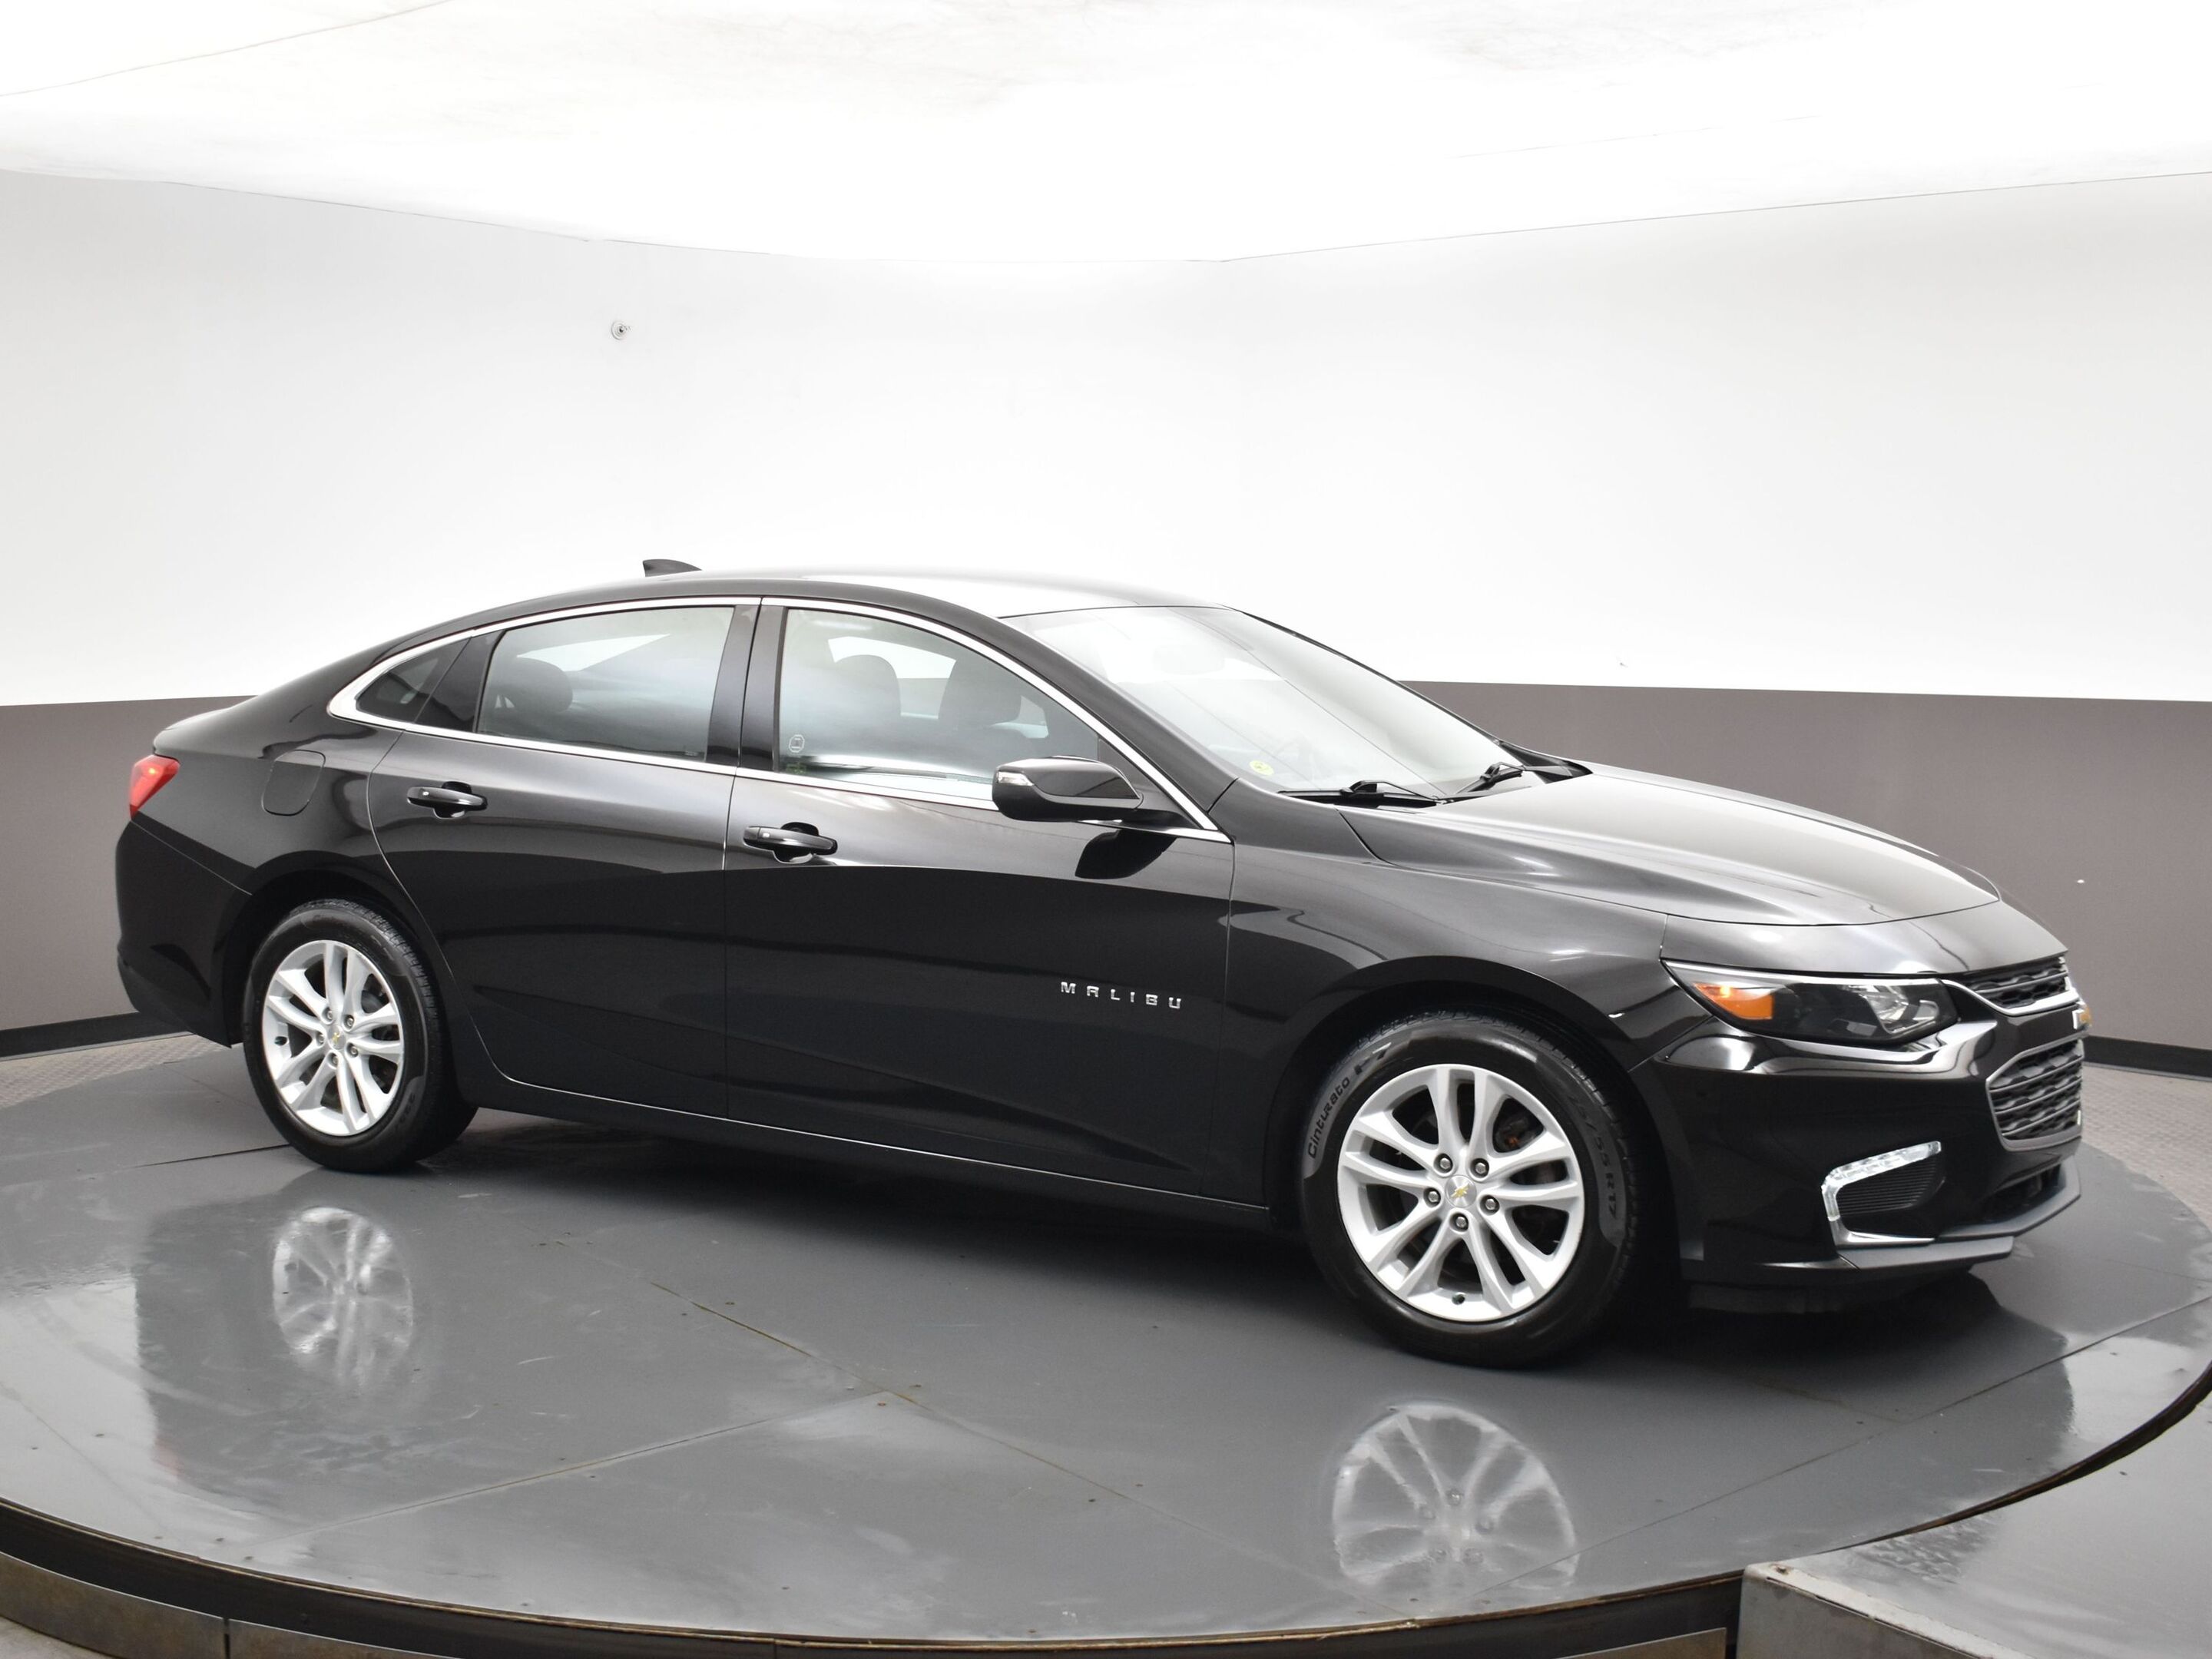 2017 Chevrolet Malibu LT - Call 902-469-8484 to Book Appointment! Lease 